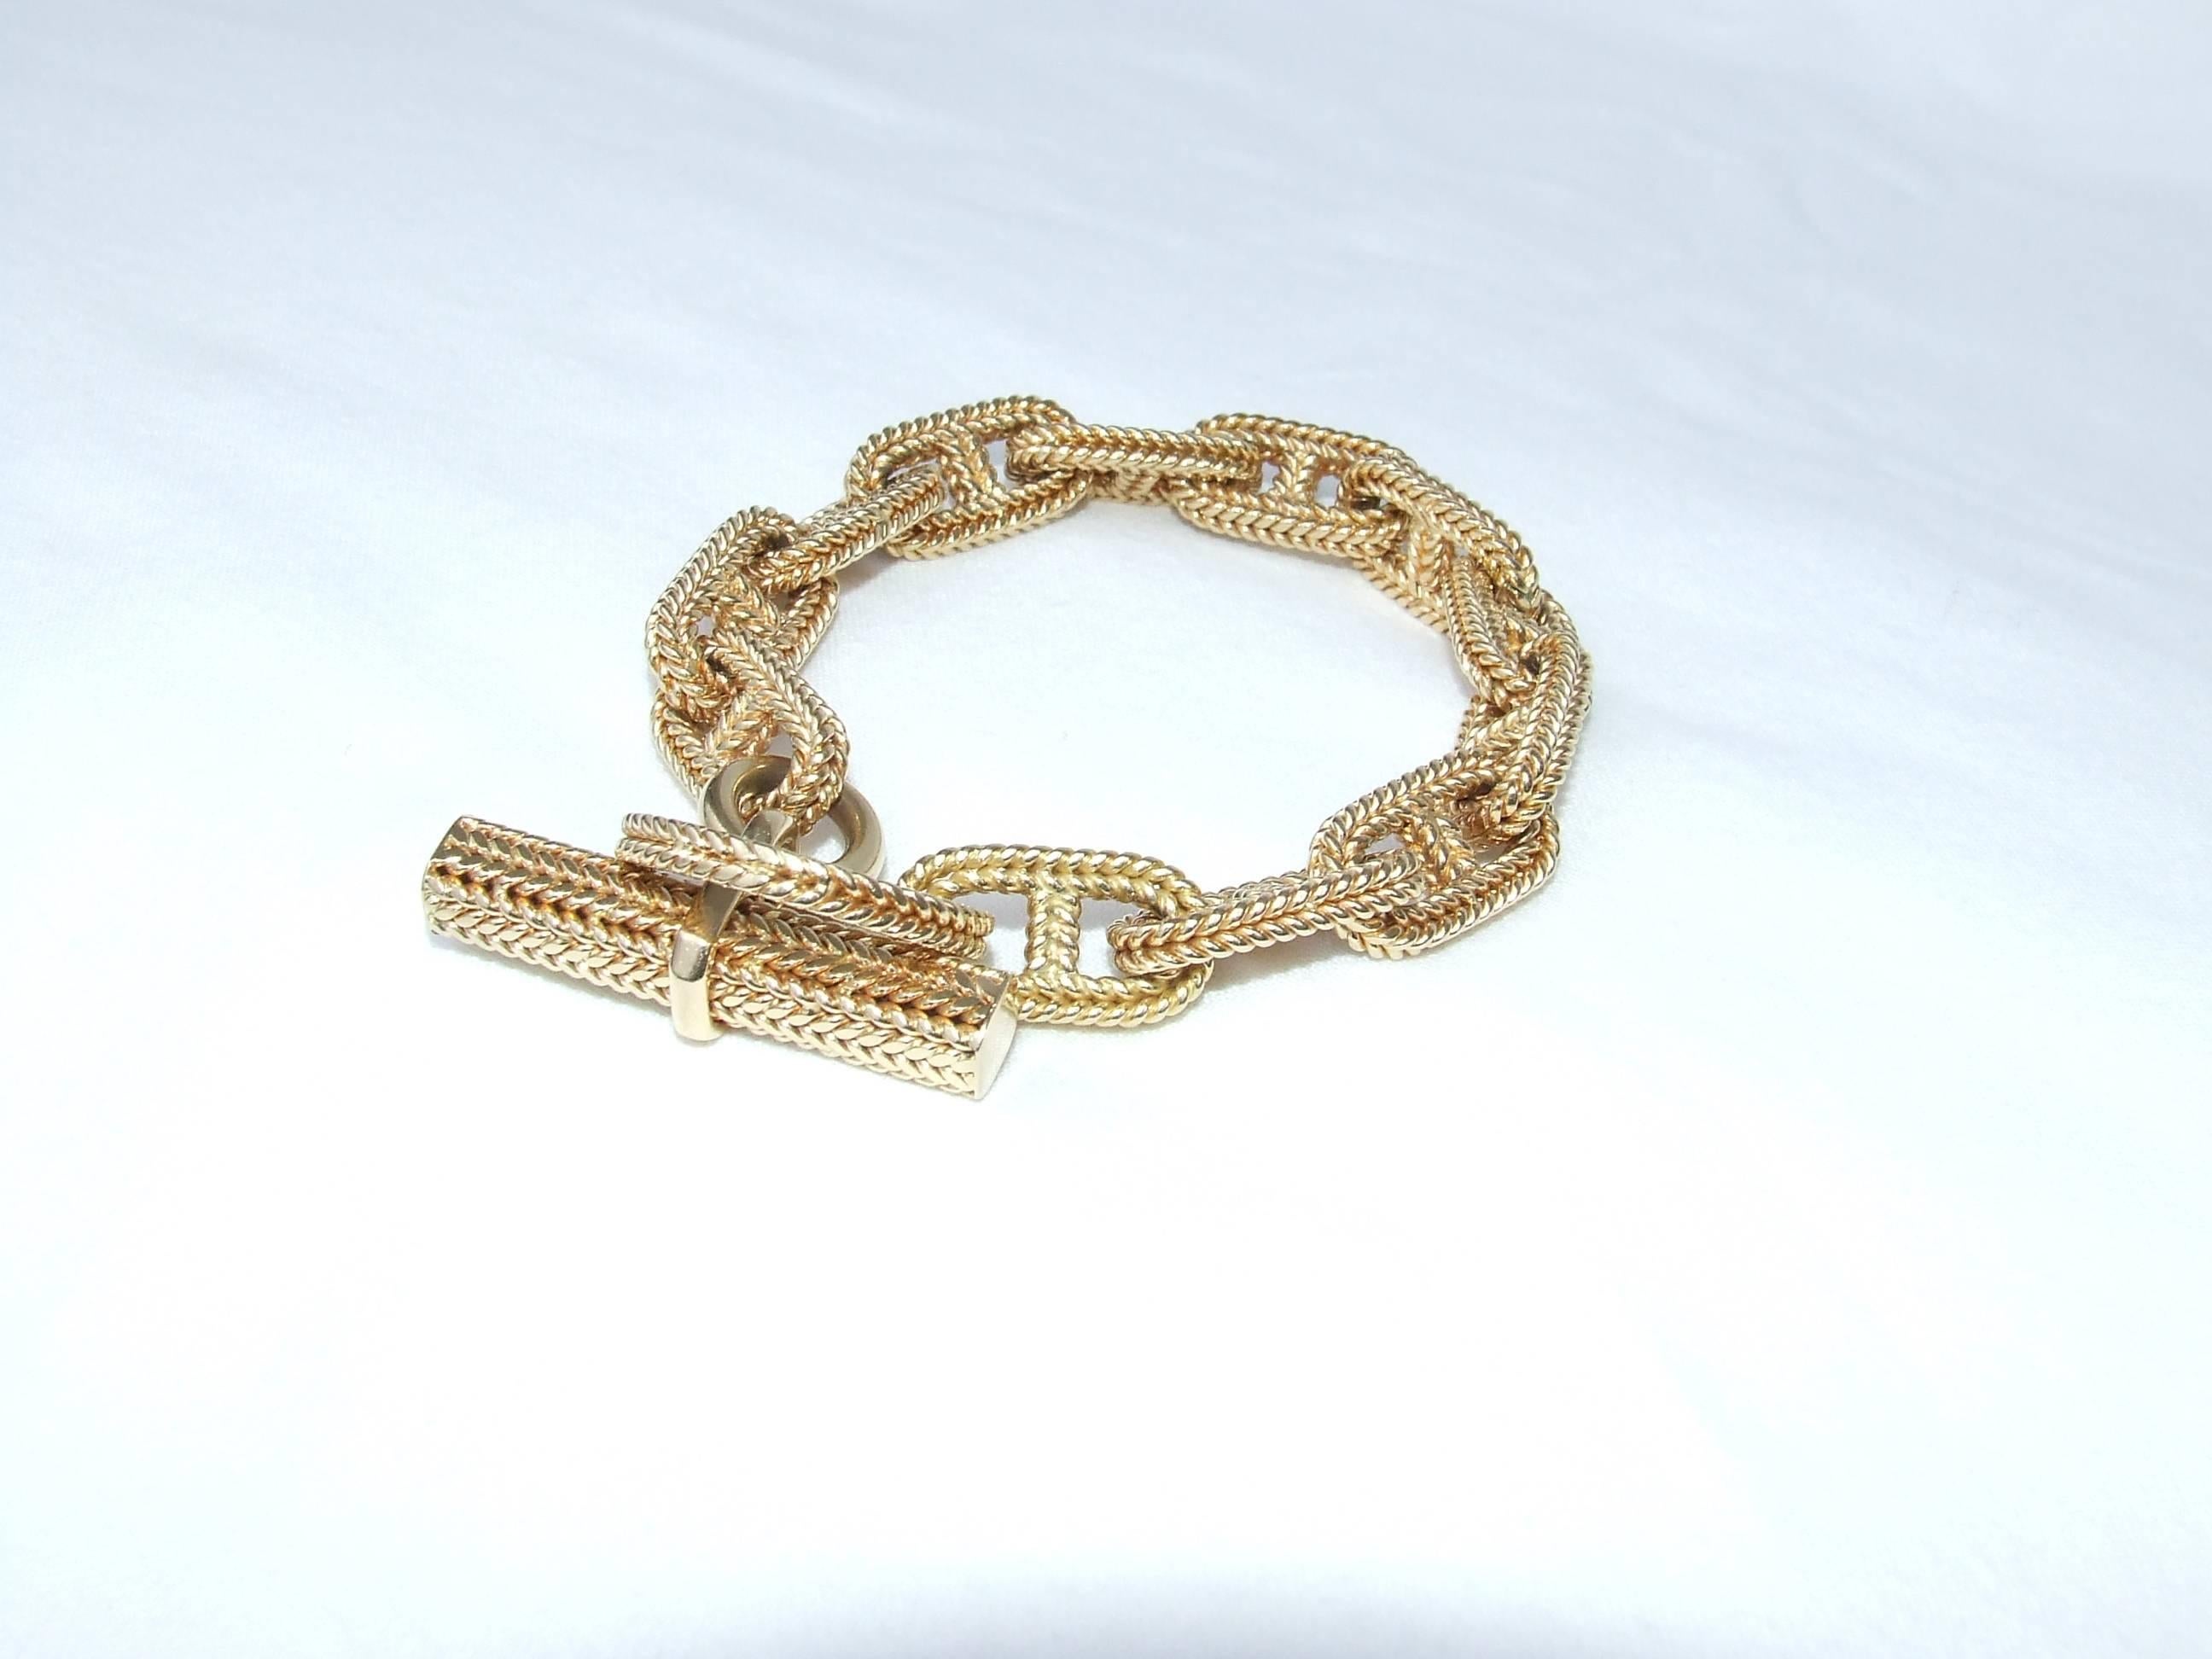 Amazing Authentic Hermès Bracelet

By Georges LENFANT

Pattern: Chaine d'Ancre

Made of Yellow Gold 750 (18K)

Composed of 12 links and one toggle closure

